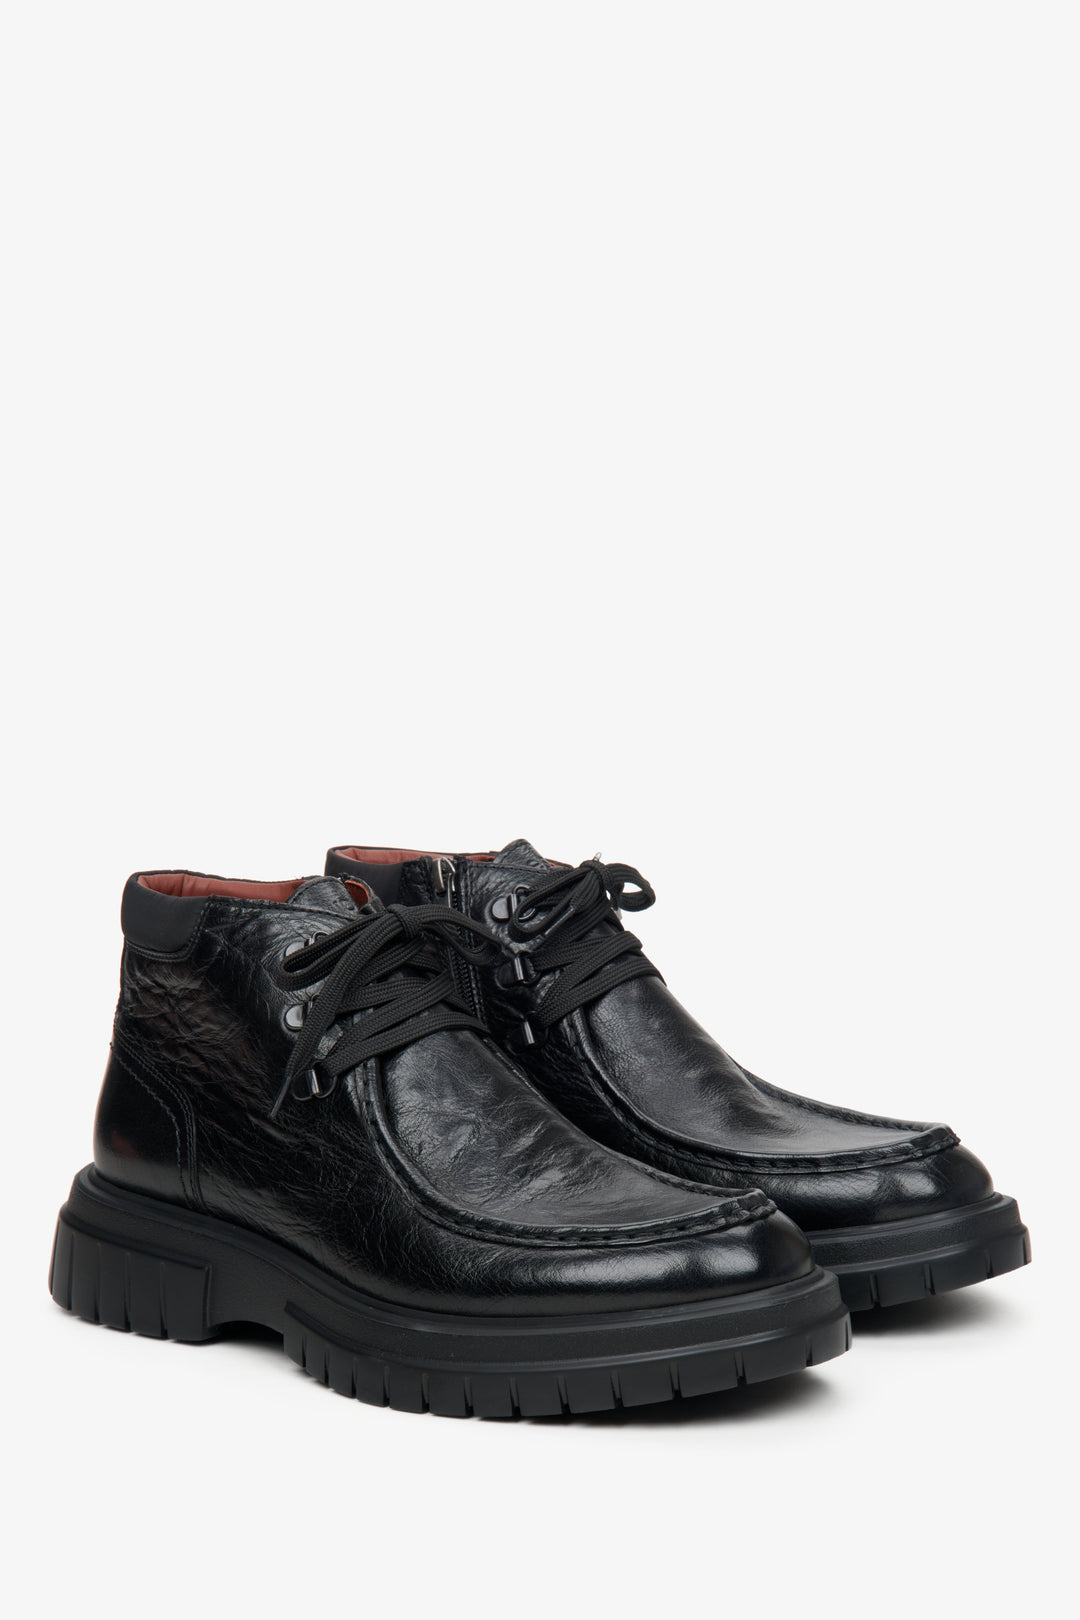 High-top men's black boots made of genuine leather by Estro.